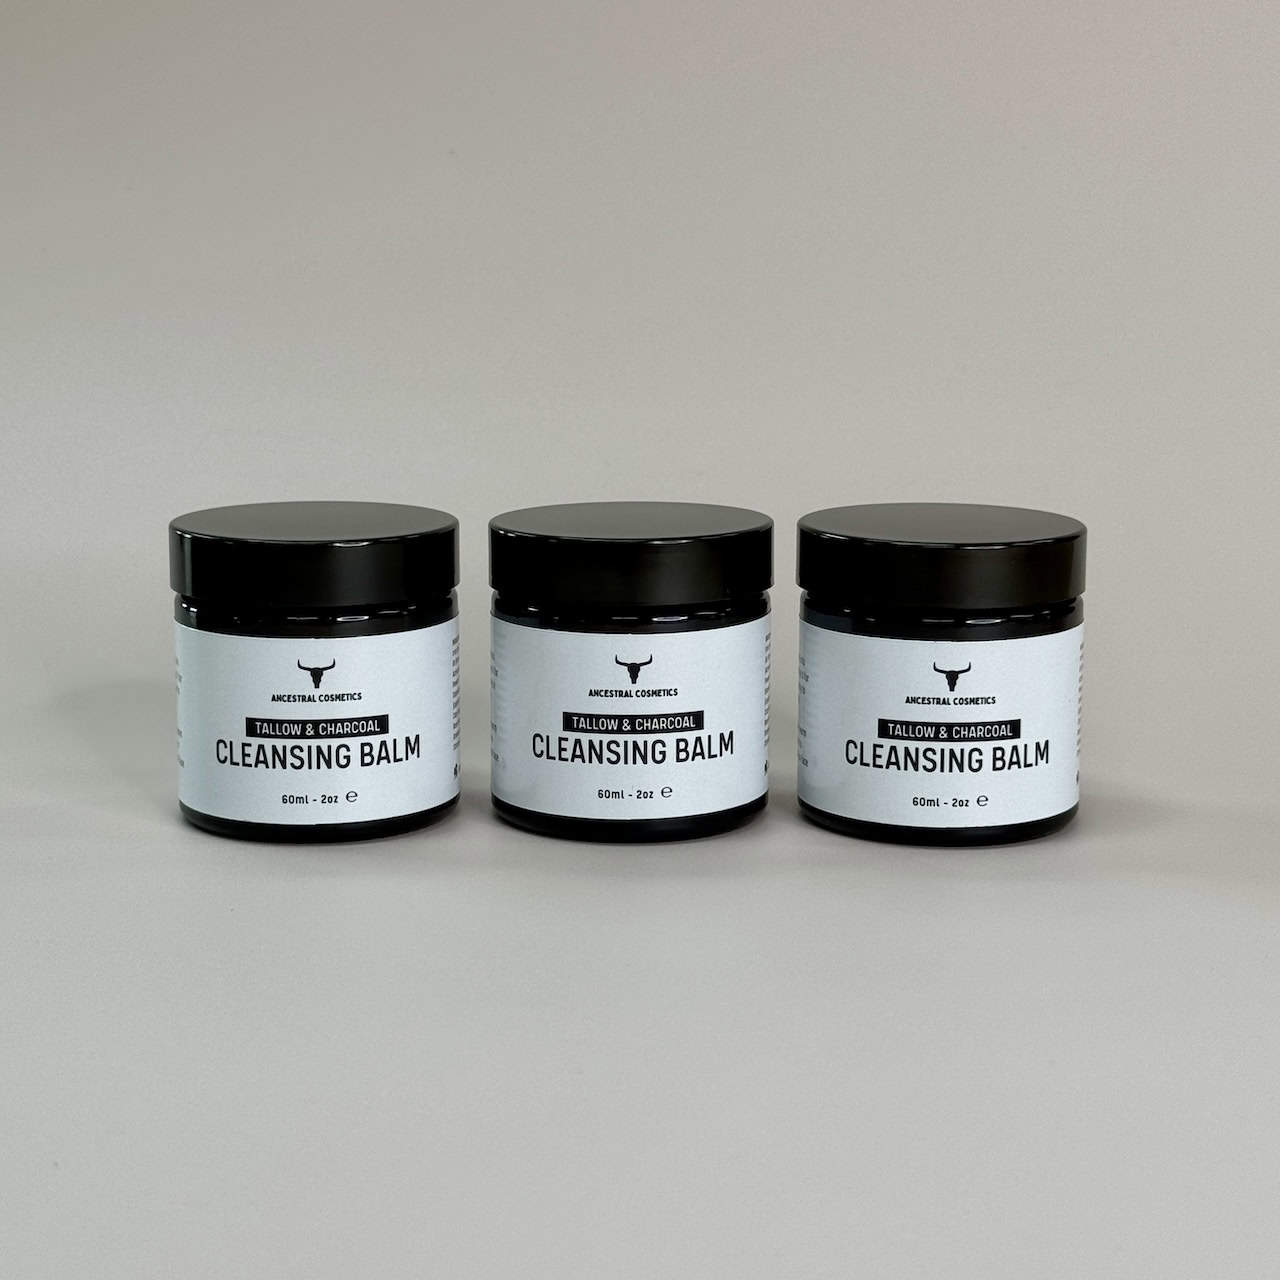 Tallow & Charcoal Cleansing Balm